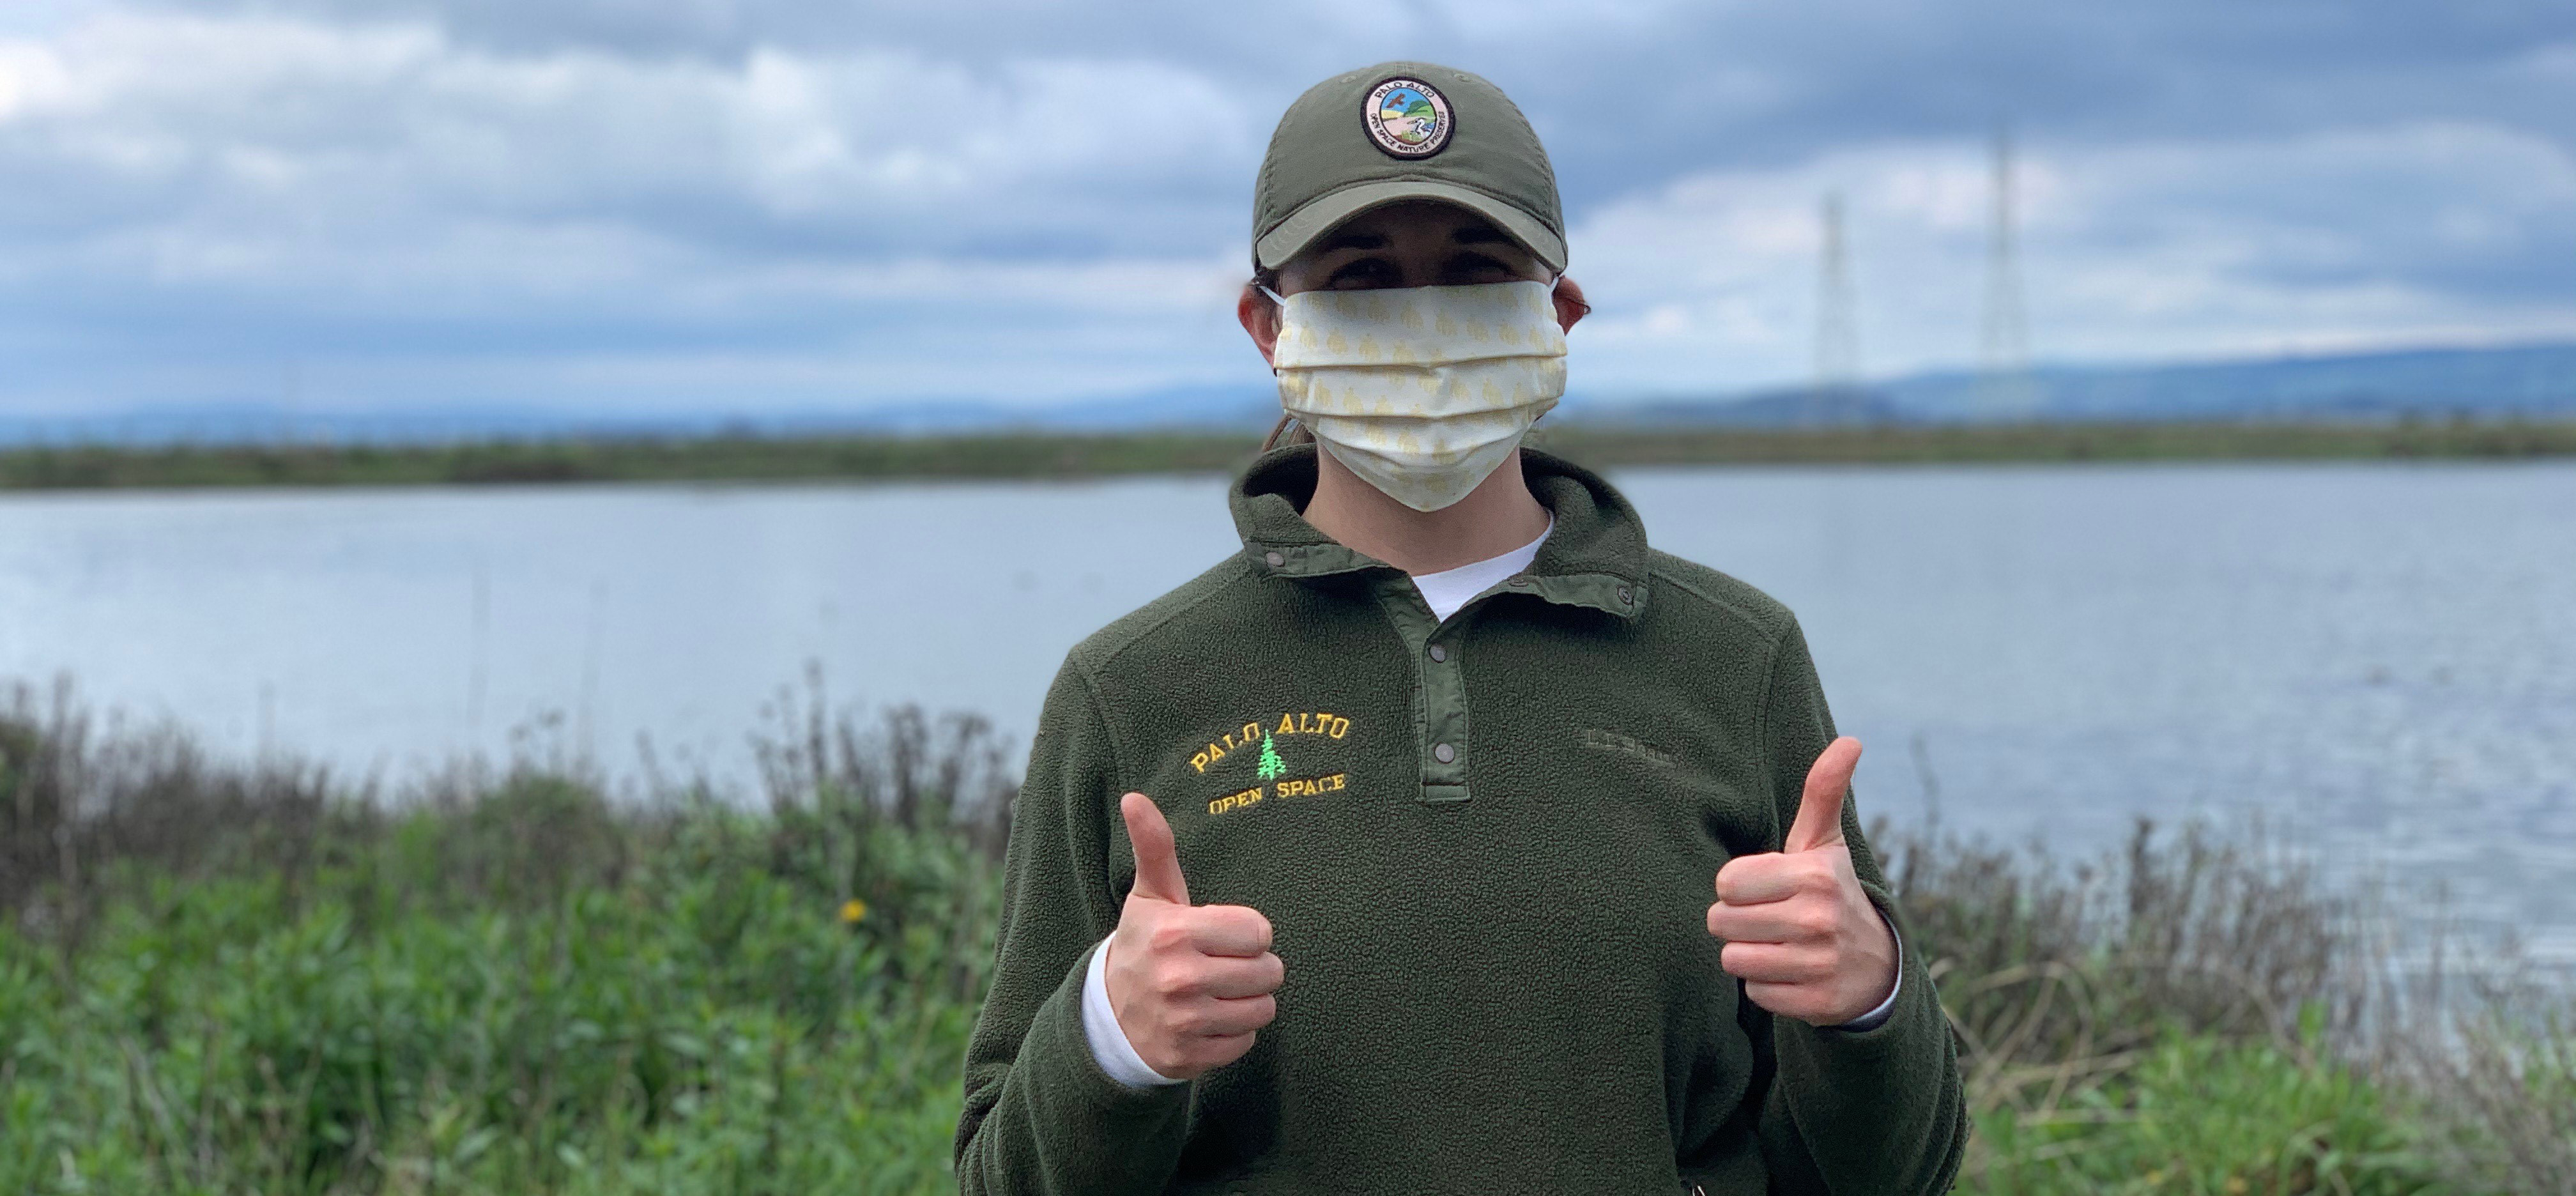 Baylands Ranger wearing a mask and showing support of safety measures with a thumbs up gesture